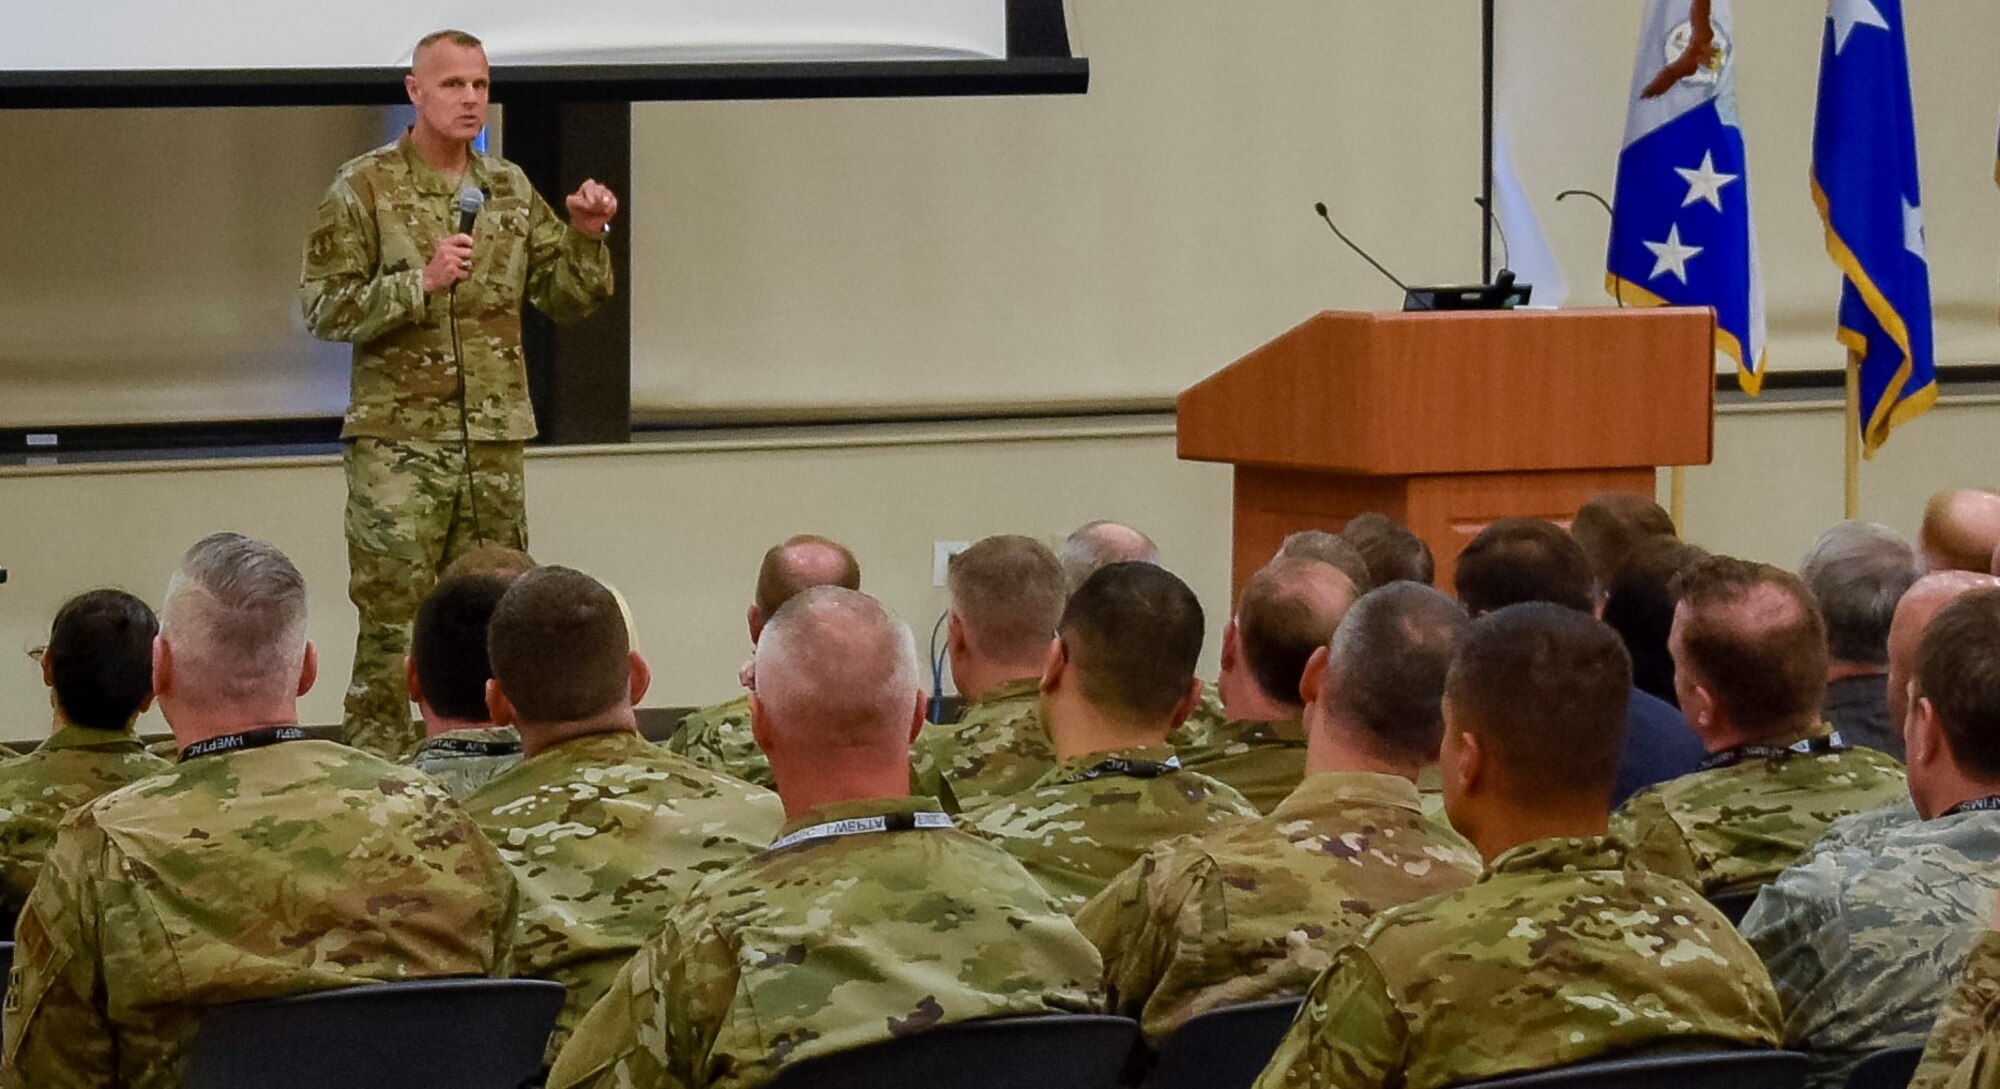 Air Force Installation and Mission Support Center Commander Maj. Gen. Brad Spacy addresses Air Force senior leaders, mission support group leaders, Mission Area Working Groups and members of the Joint Base San Antonio community at the conclusion of the AFIMSC-hosted Installation and Mission Support Weapons and Tactics Conference April 10 at JBSA-Lackland. (U.S. Air Force photo by Malcolm McClendon)